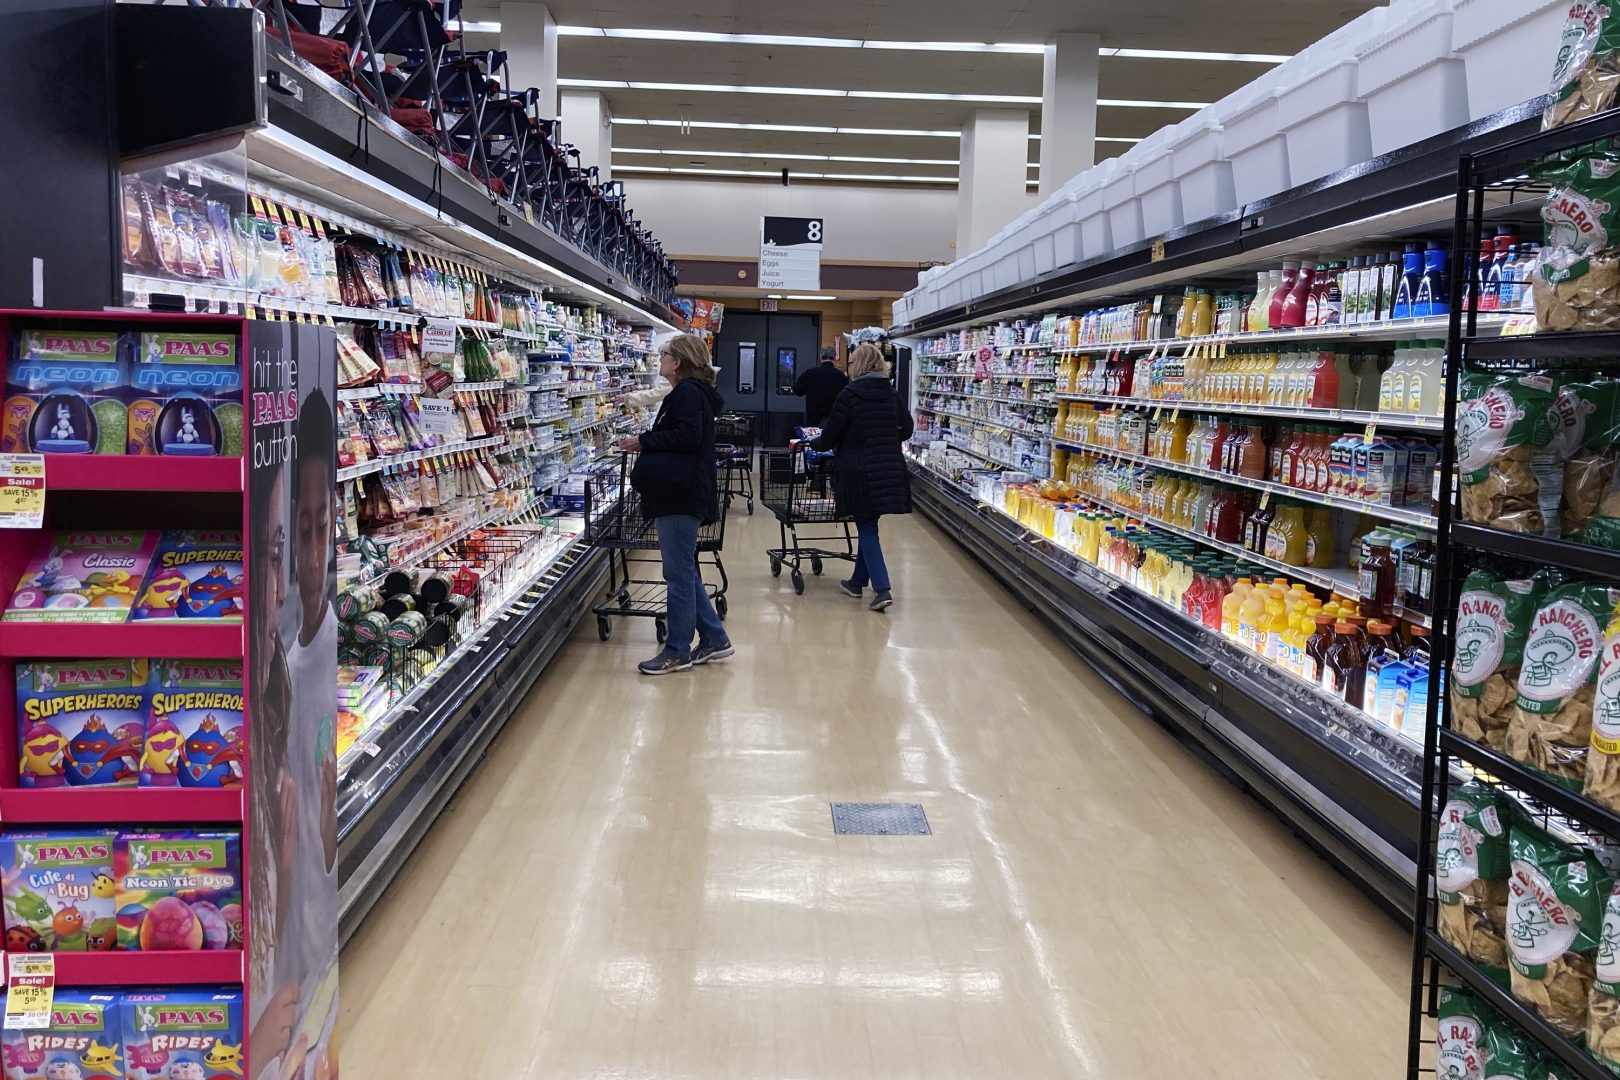 Customers shop at a grocery store in Mount Prospect, Ill., Friday, April 1, 2022. USDA says food inflation rate to soar, highest since 2008.